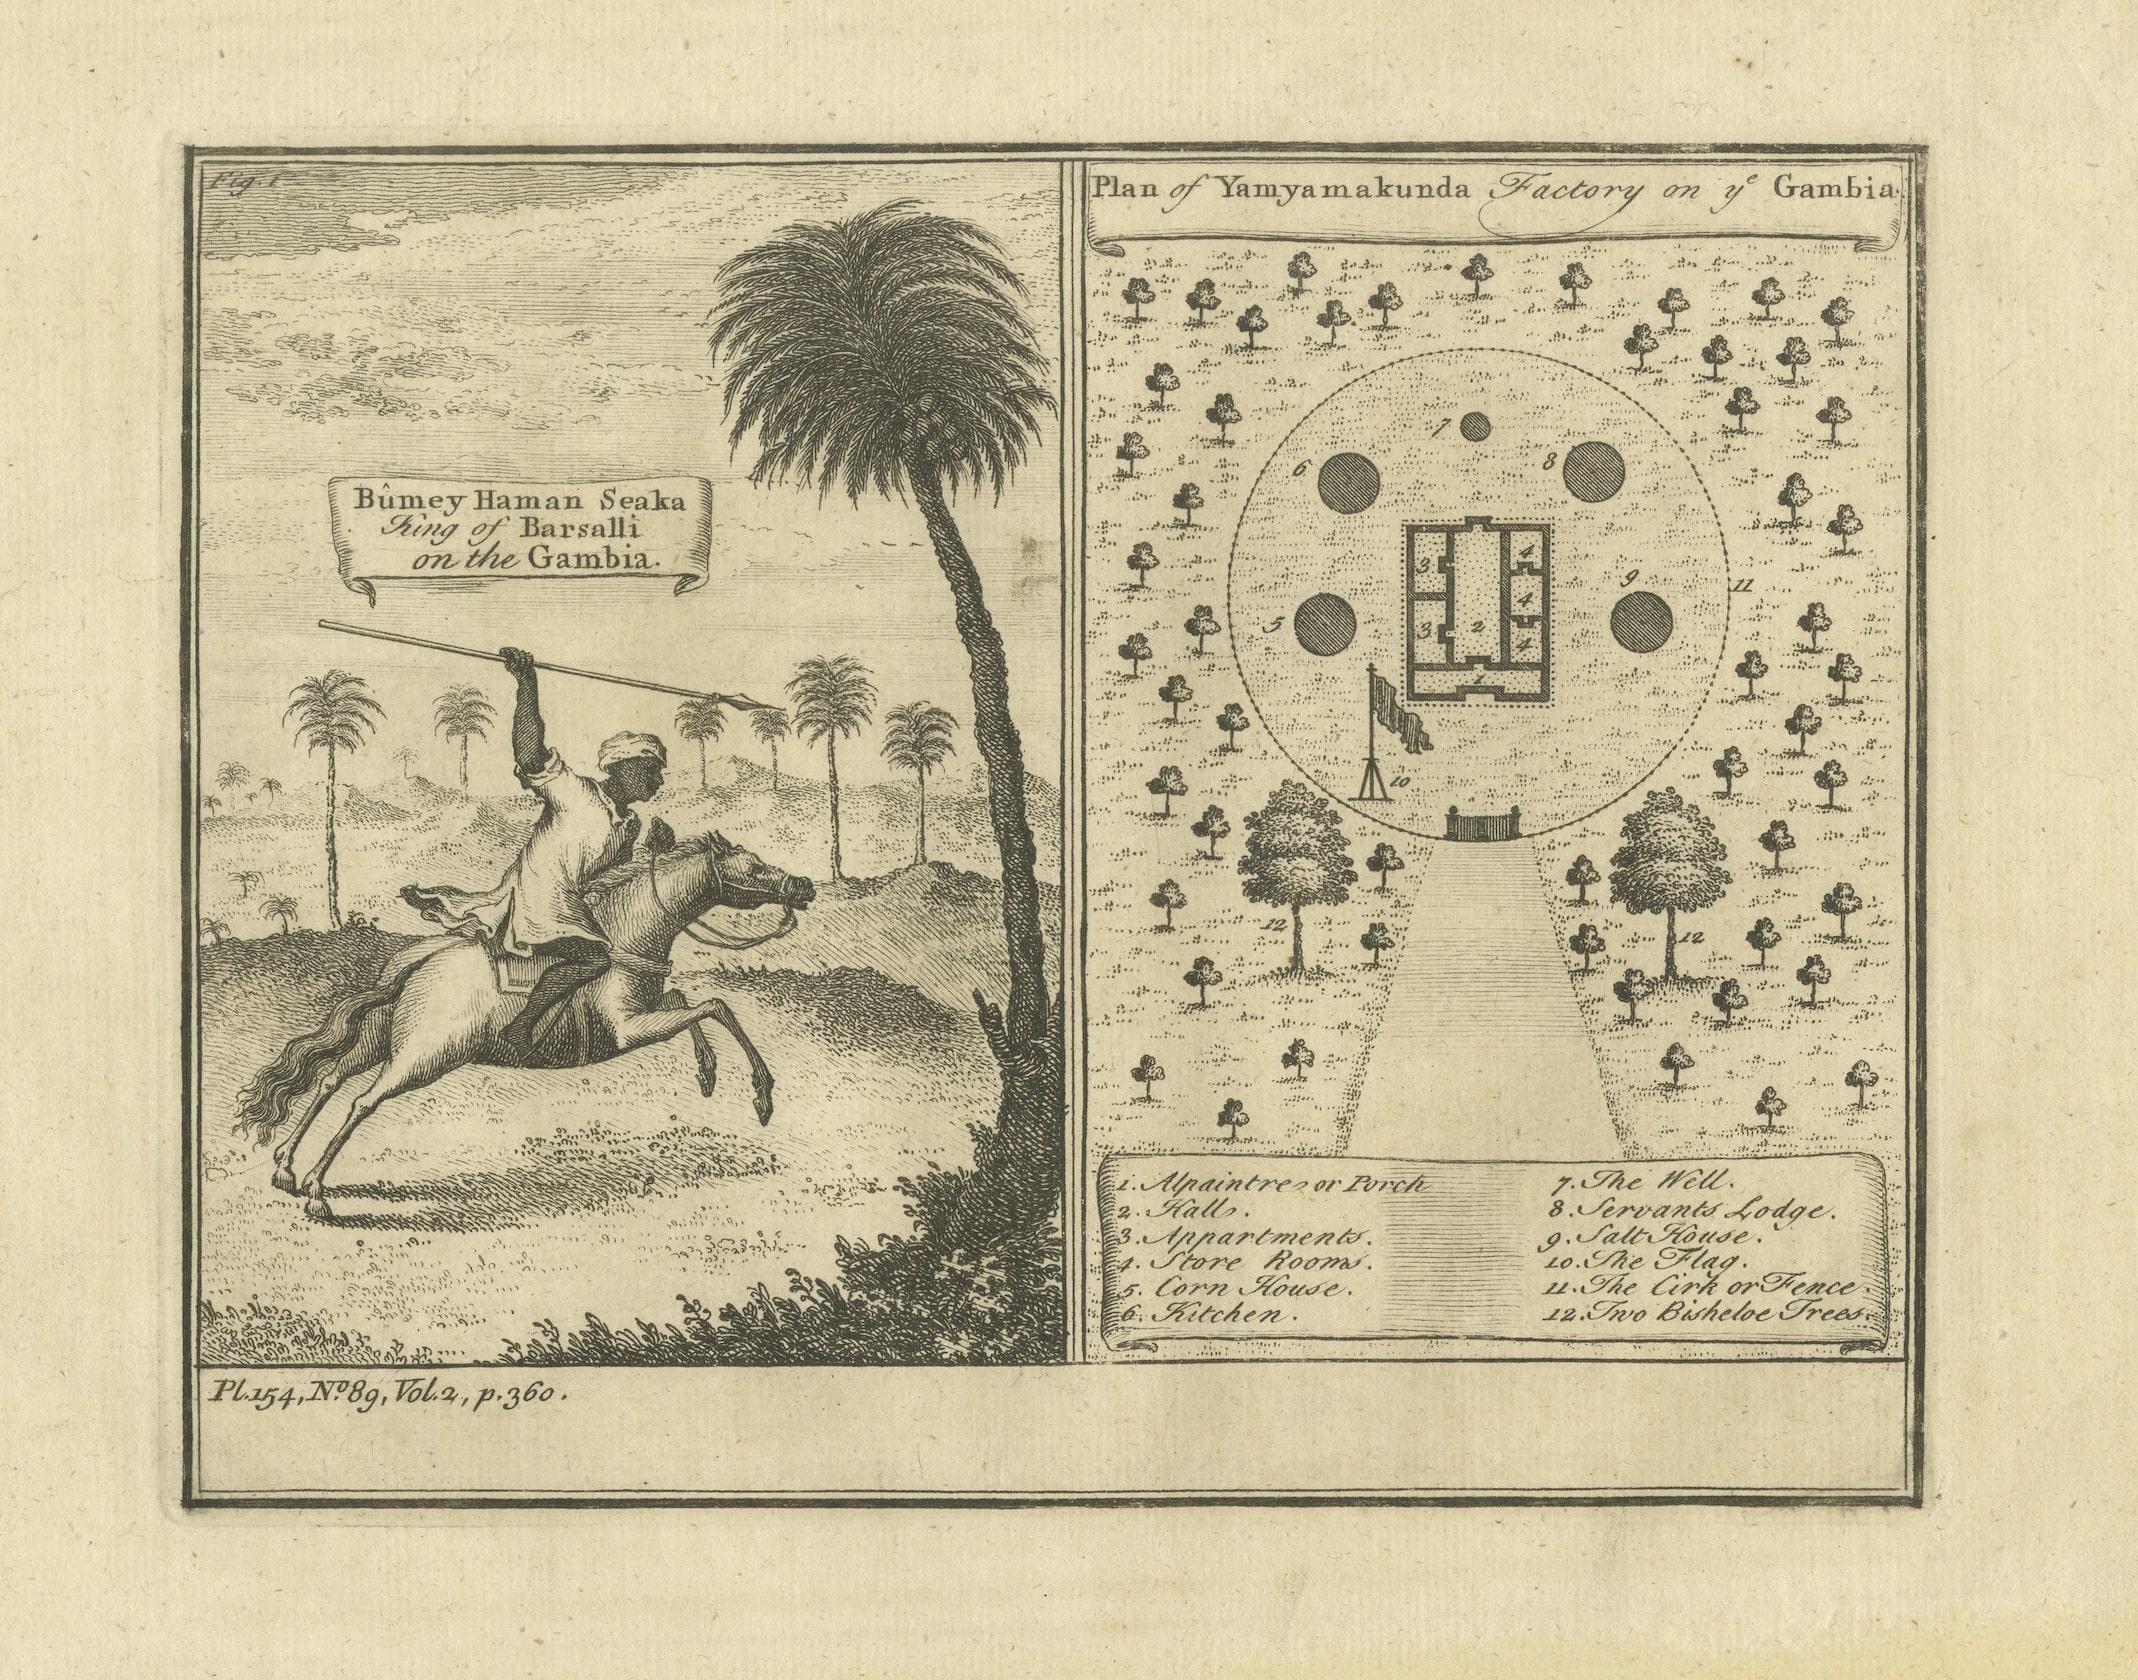 Old Engraving with Title: Bumey Haman Seaka, King of Barsalli on the Gambia // plan of Yamyamakunda Factory on ye Gambia. 

Artist/engraver/cartographer: Unsigned. 

Provenance: 